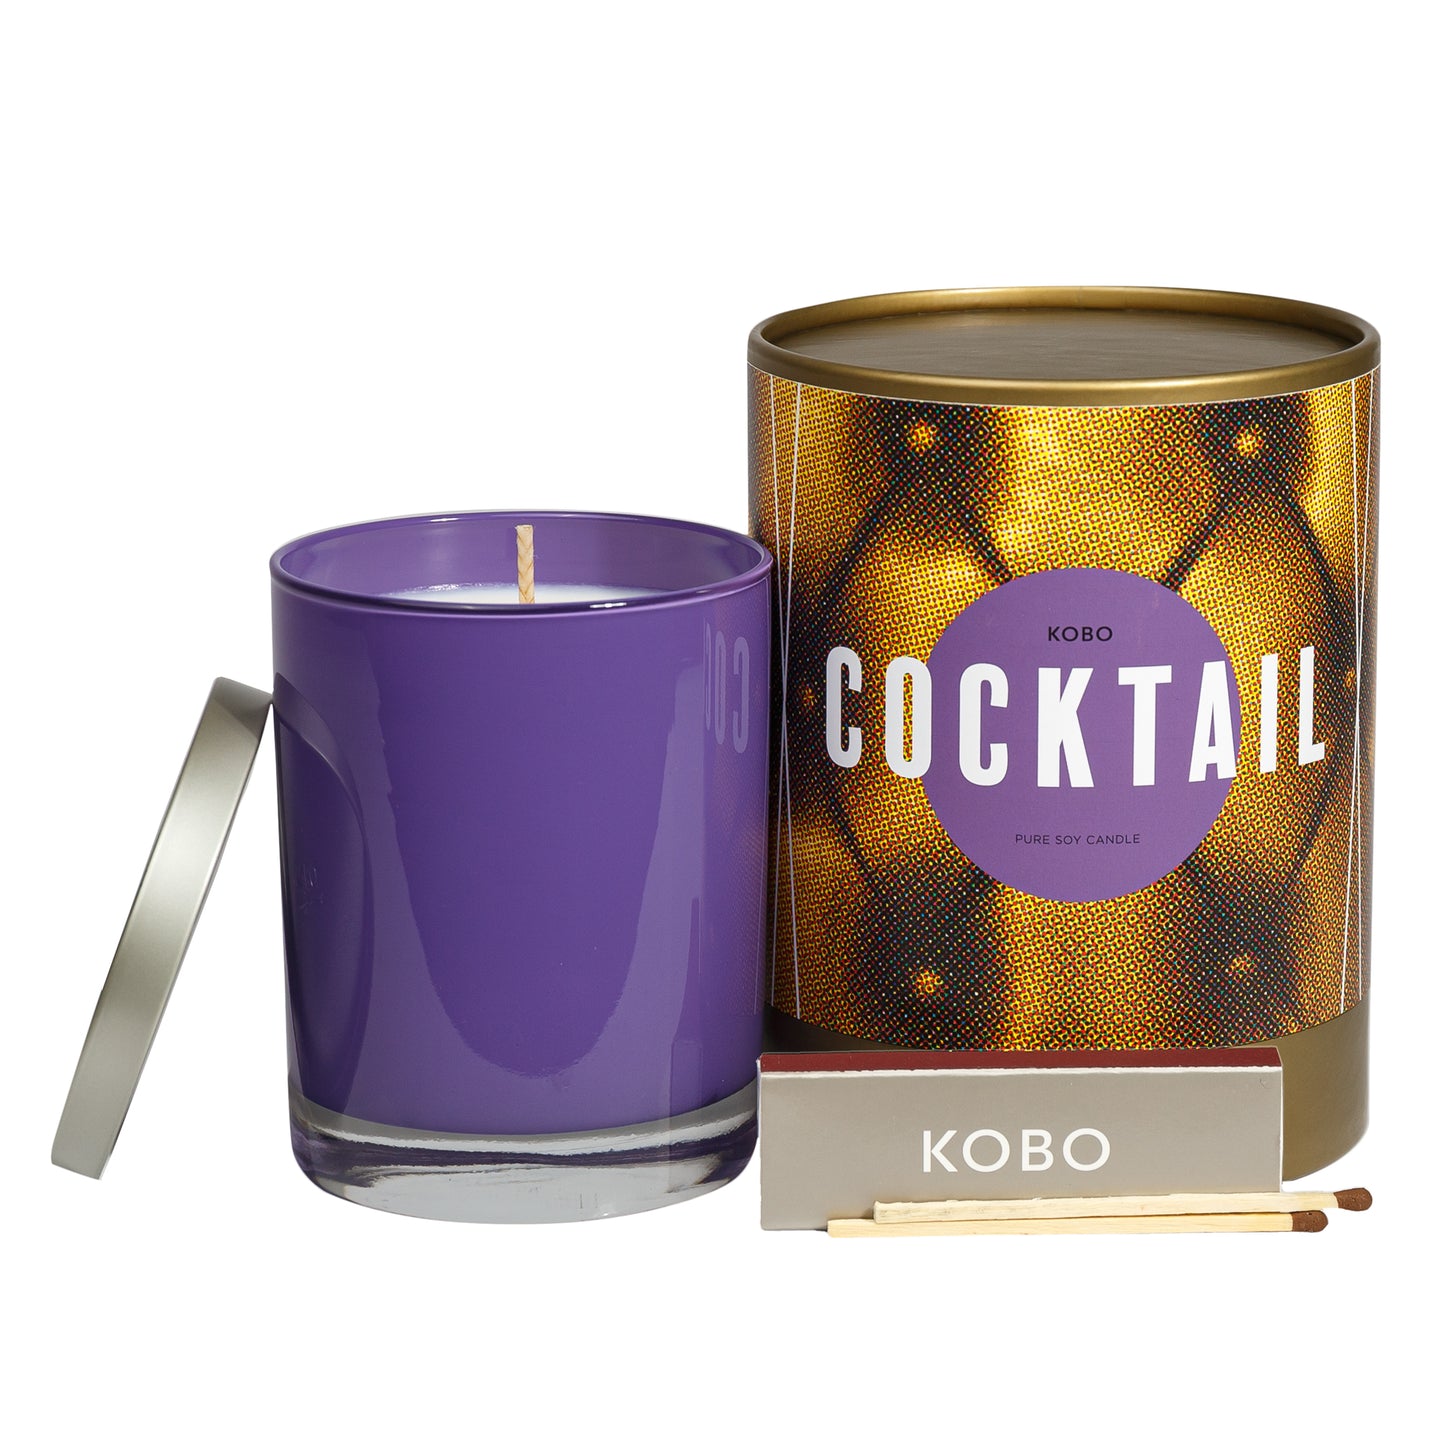 Primary Image of Cocktail Road Trip Candle